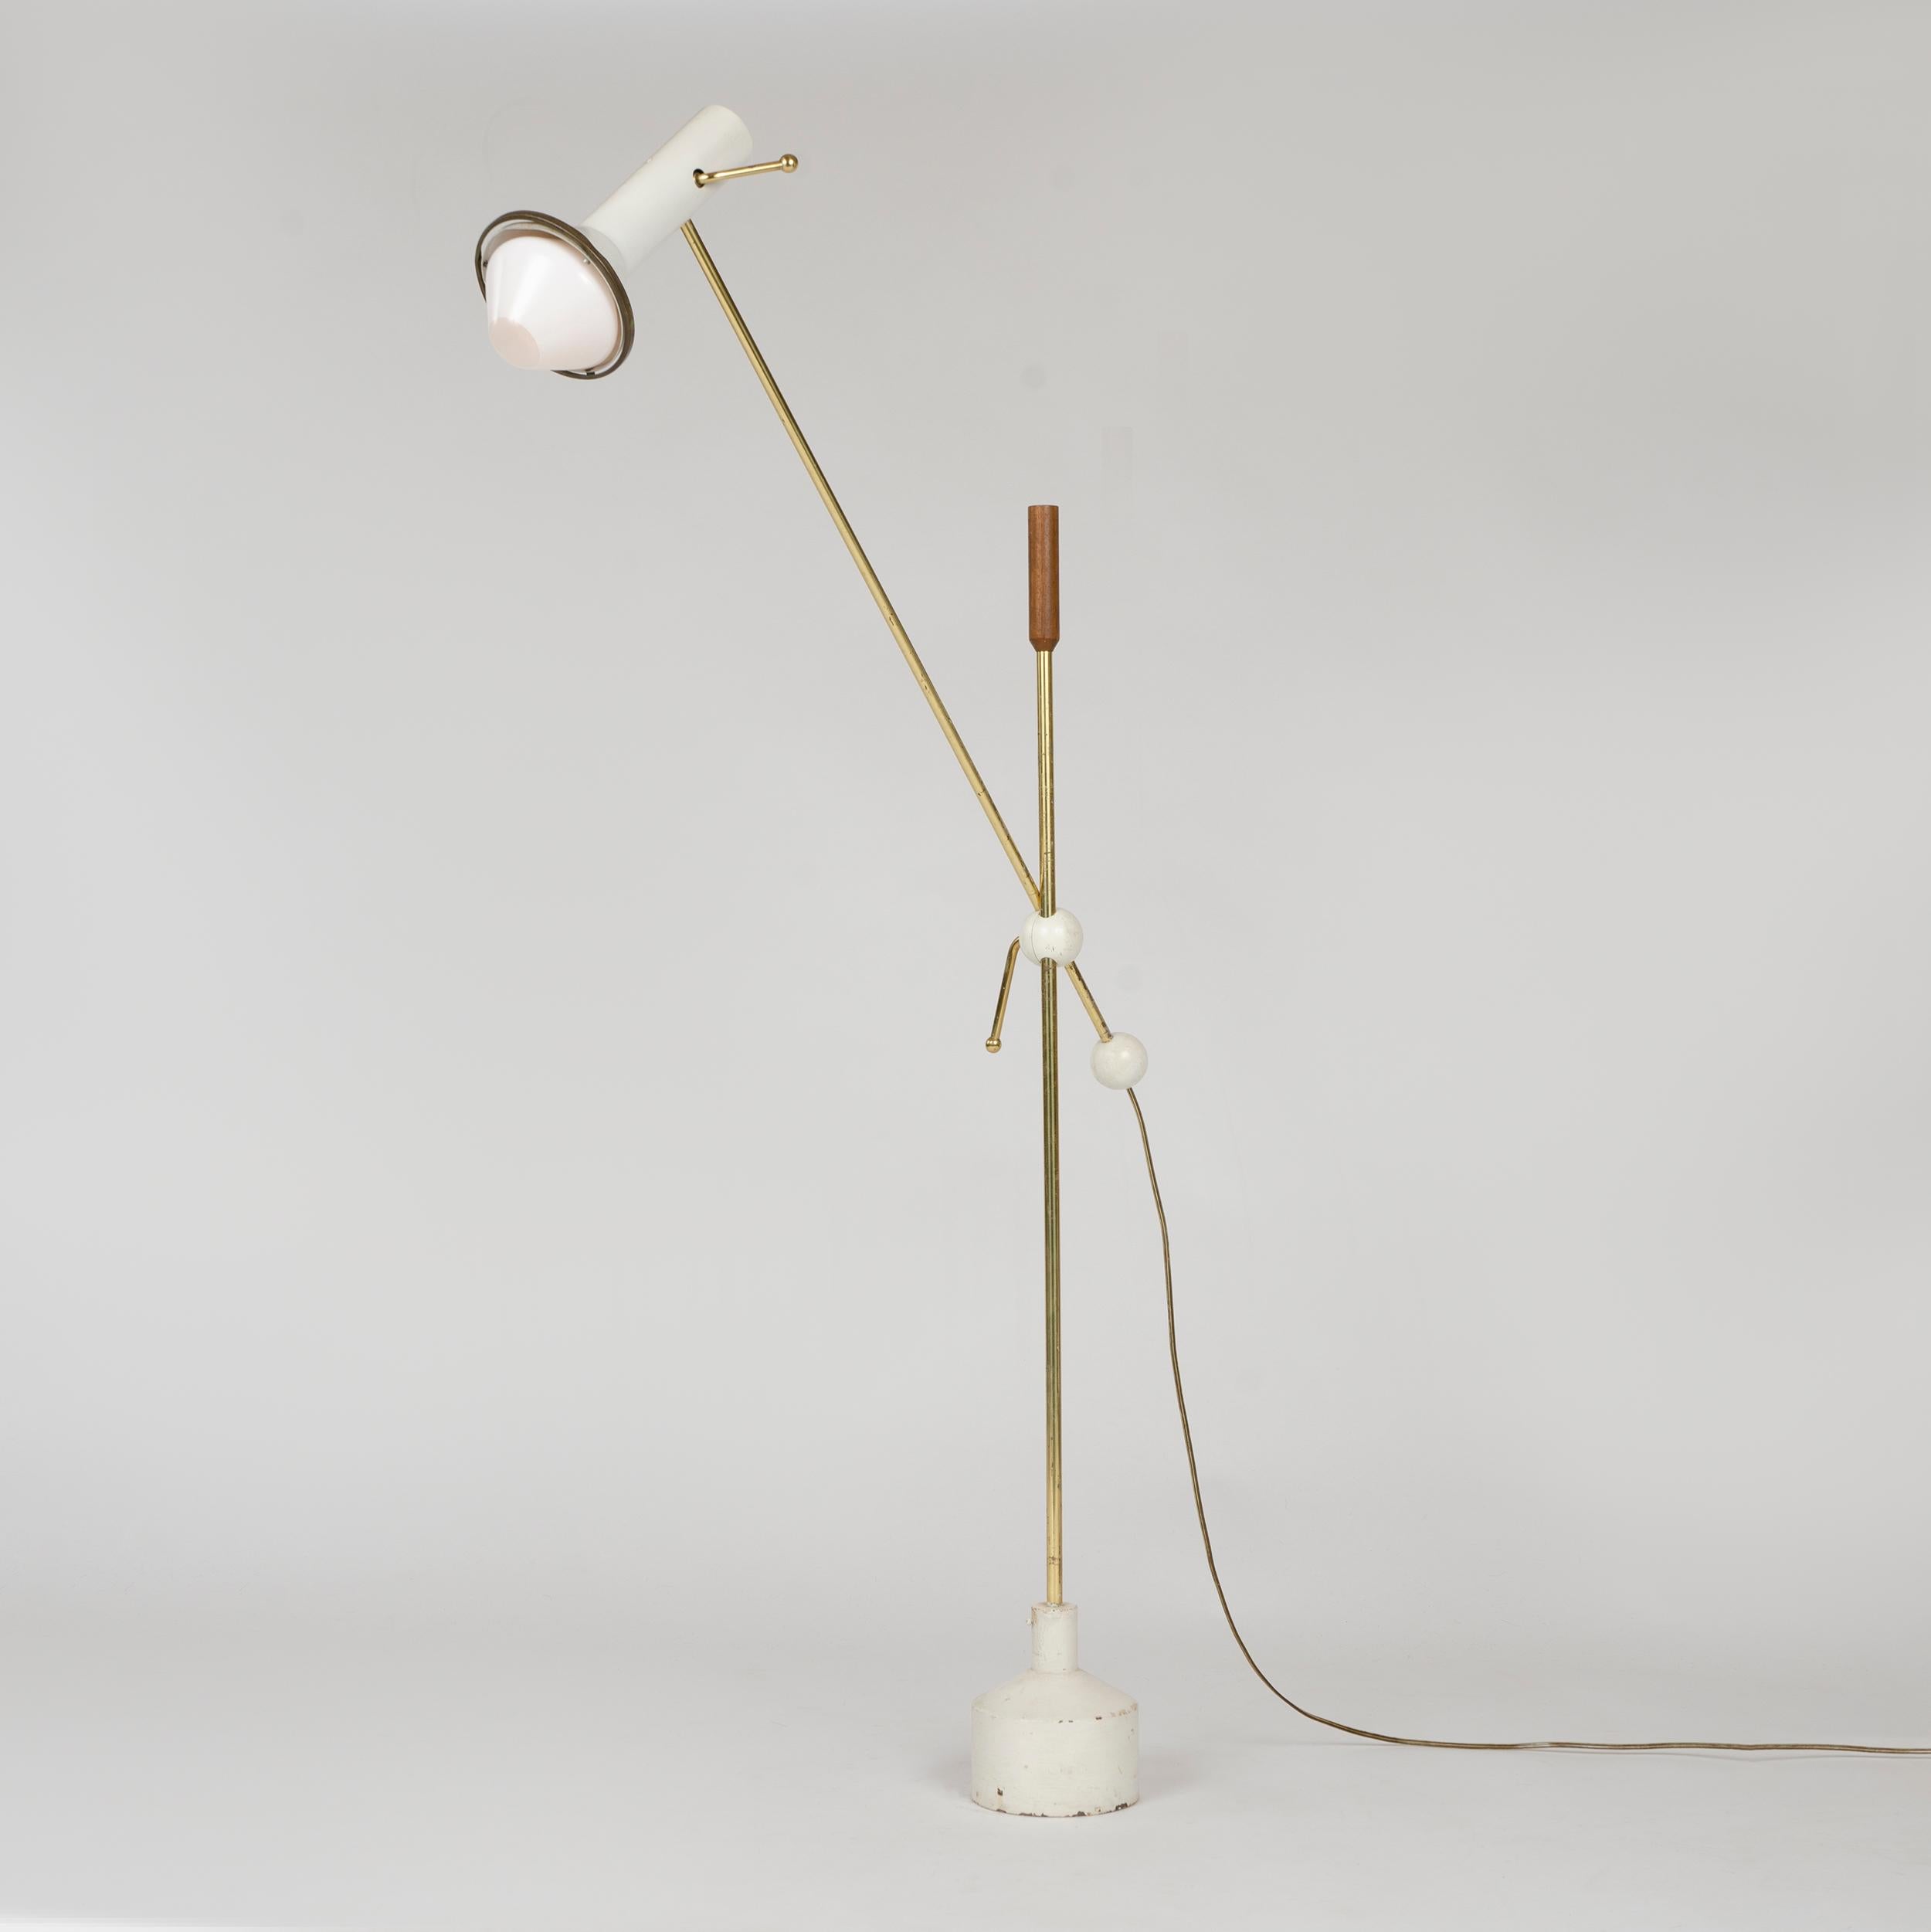 An uncommon Scandinavian brass and painted aluminum floor lamp with a cylindrical teak finial, cast-iron base, and an adjustable arm with a pivoting shade.